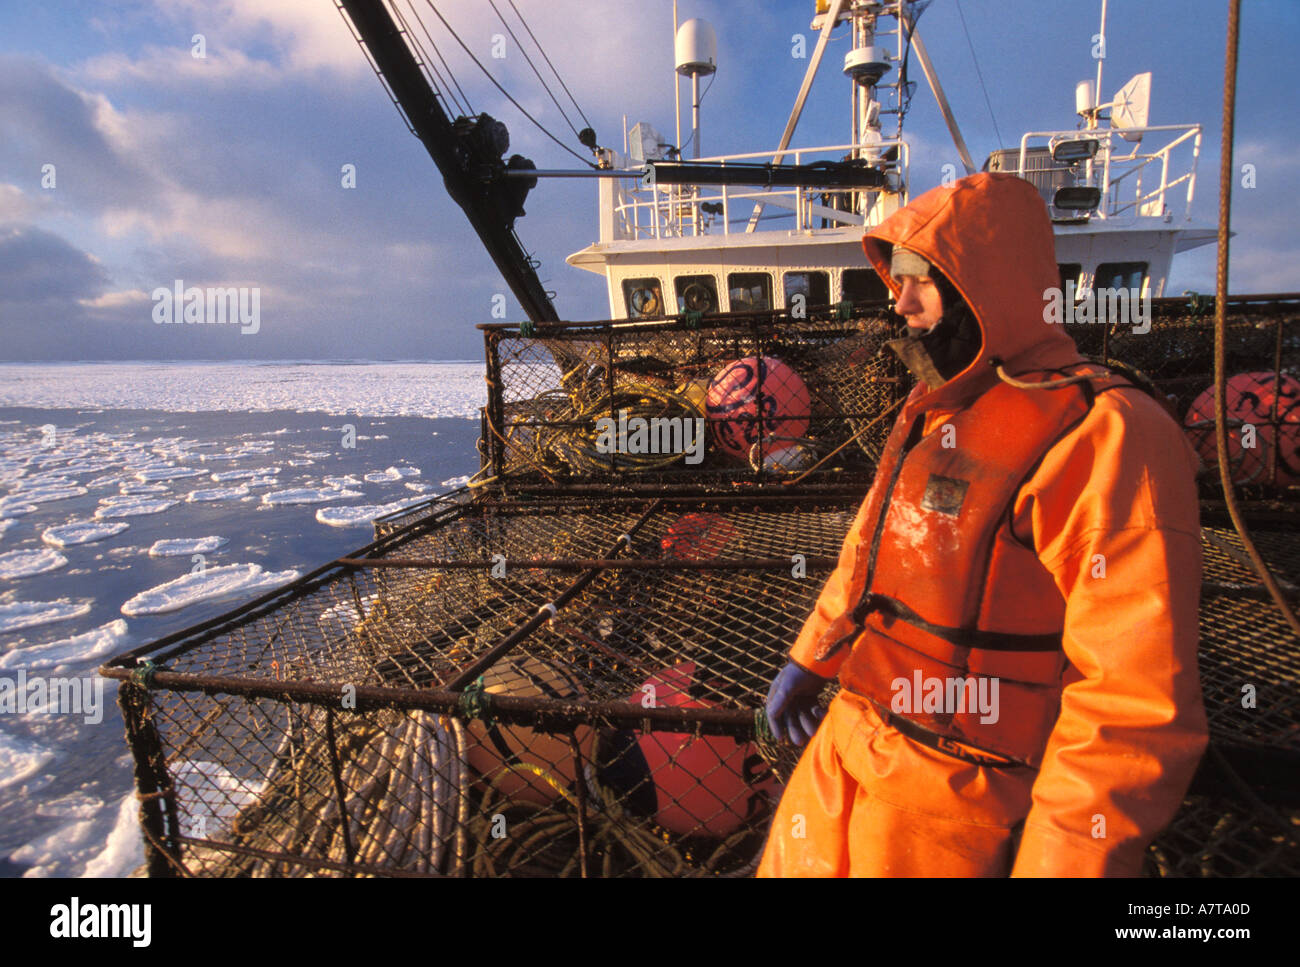 Commercial Crab Fisherman on a boat surrounded by sea ice Alaska Bering Sea  Stock Photo - Alamy